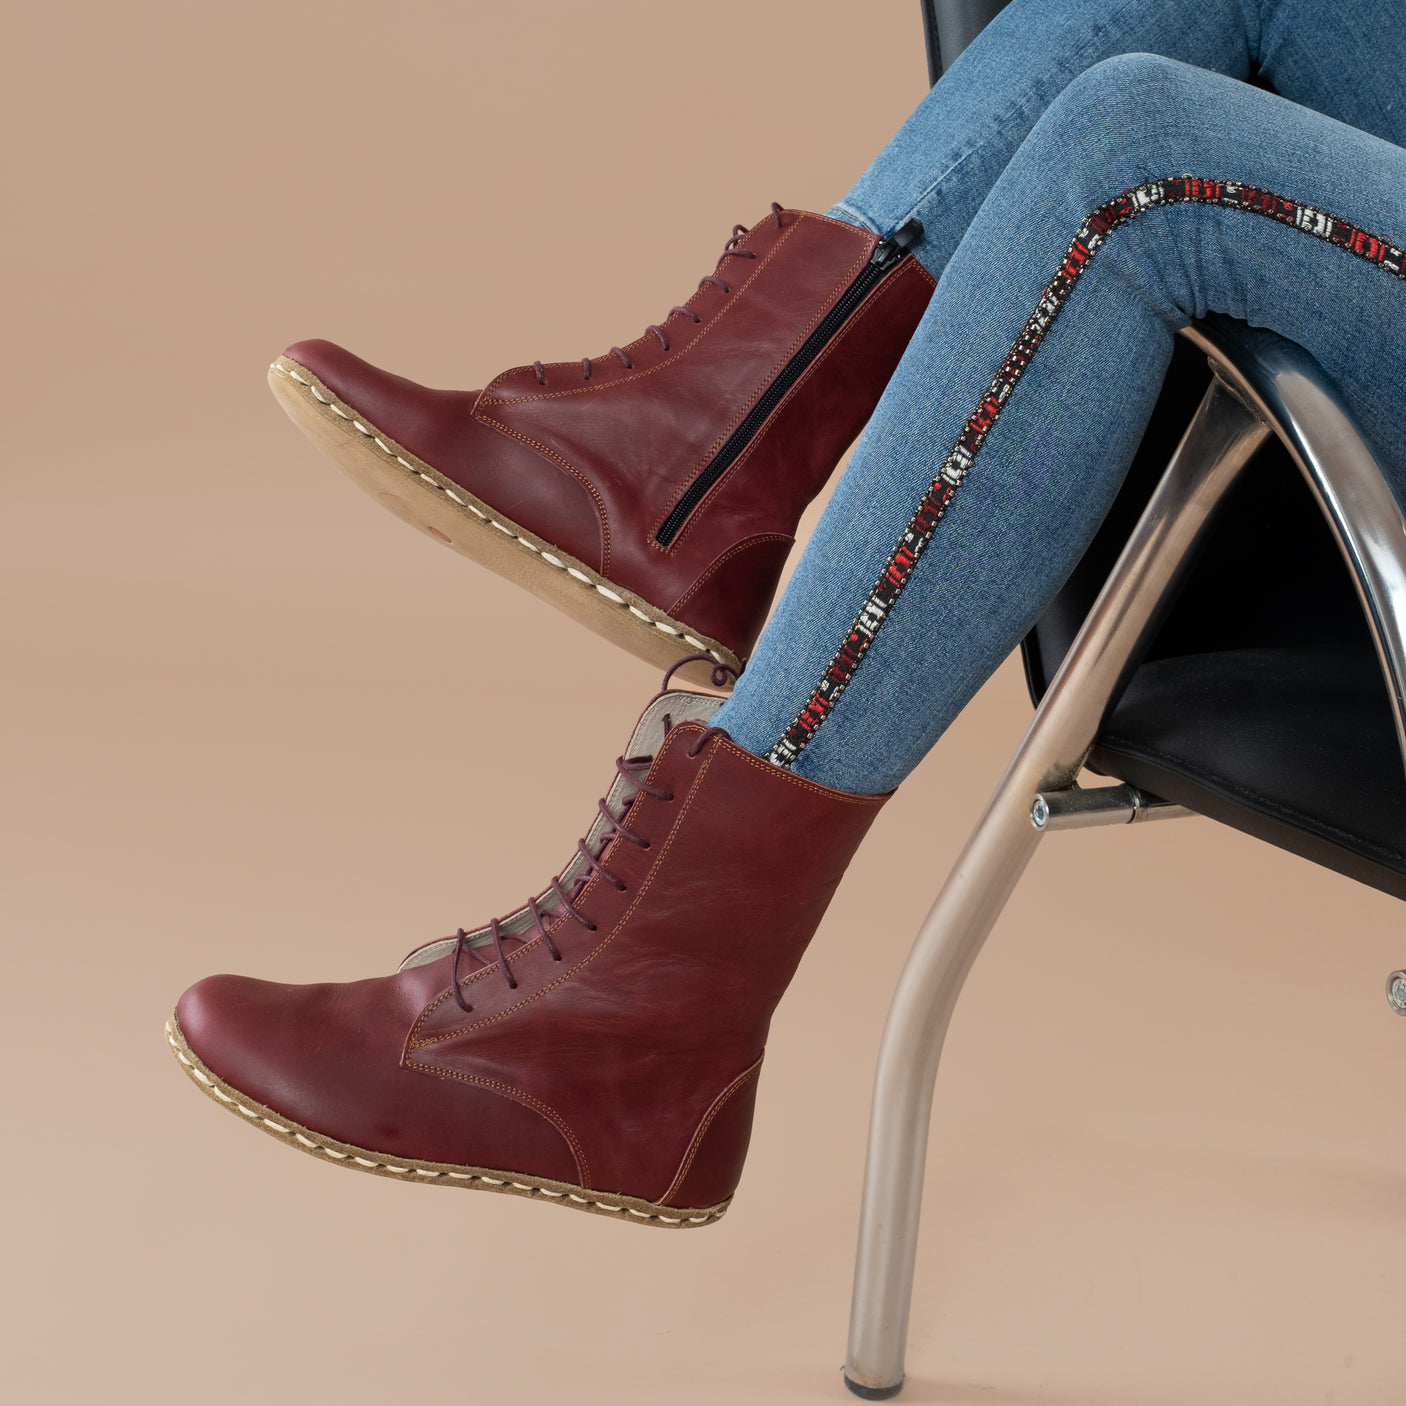 Women's Burgundy Barefoot High Ankle Boots